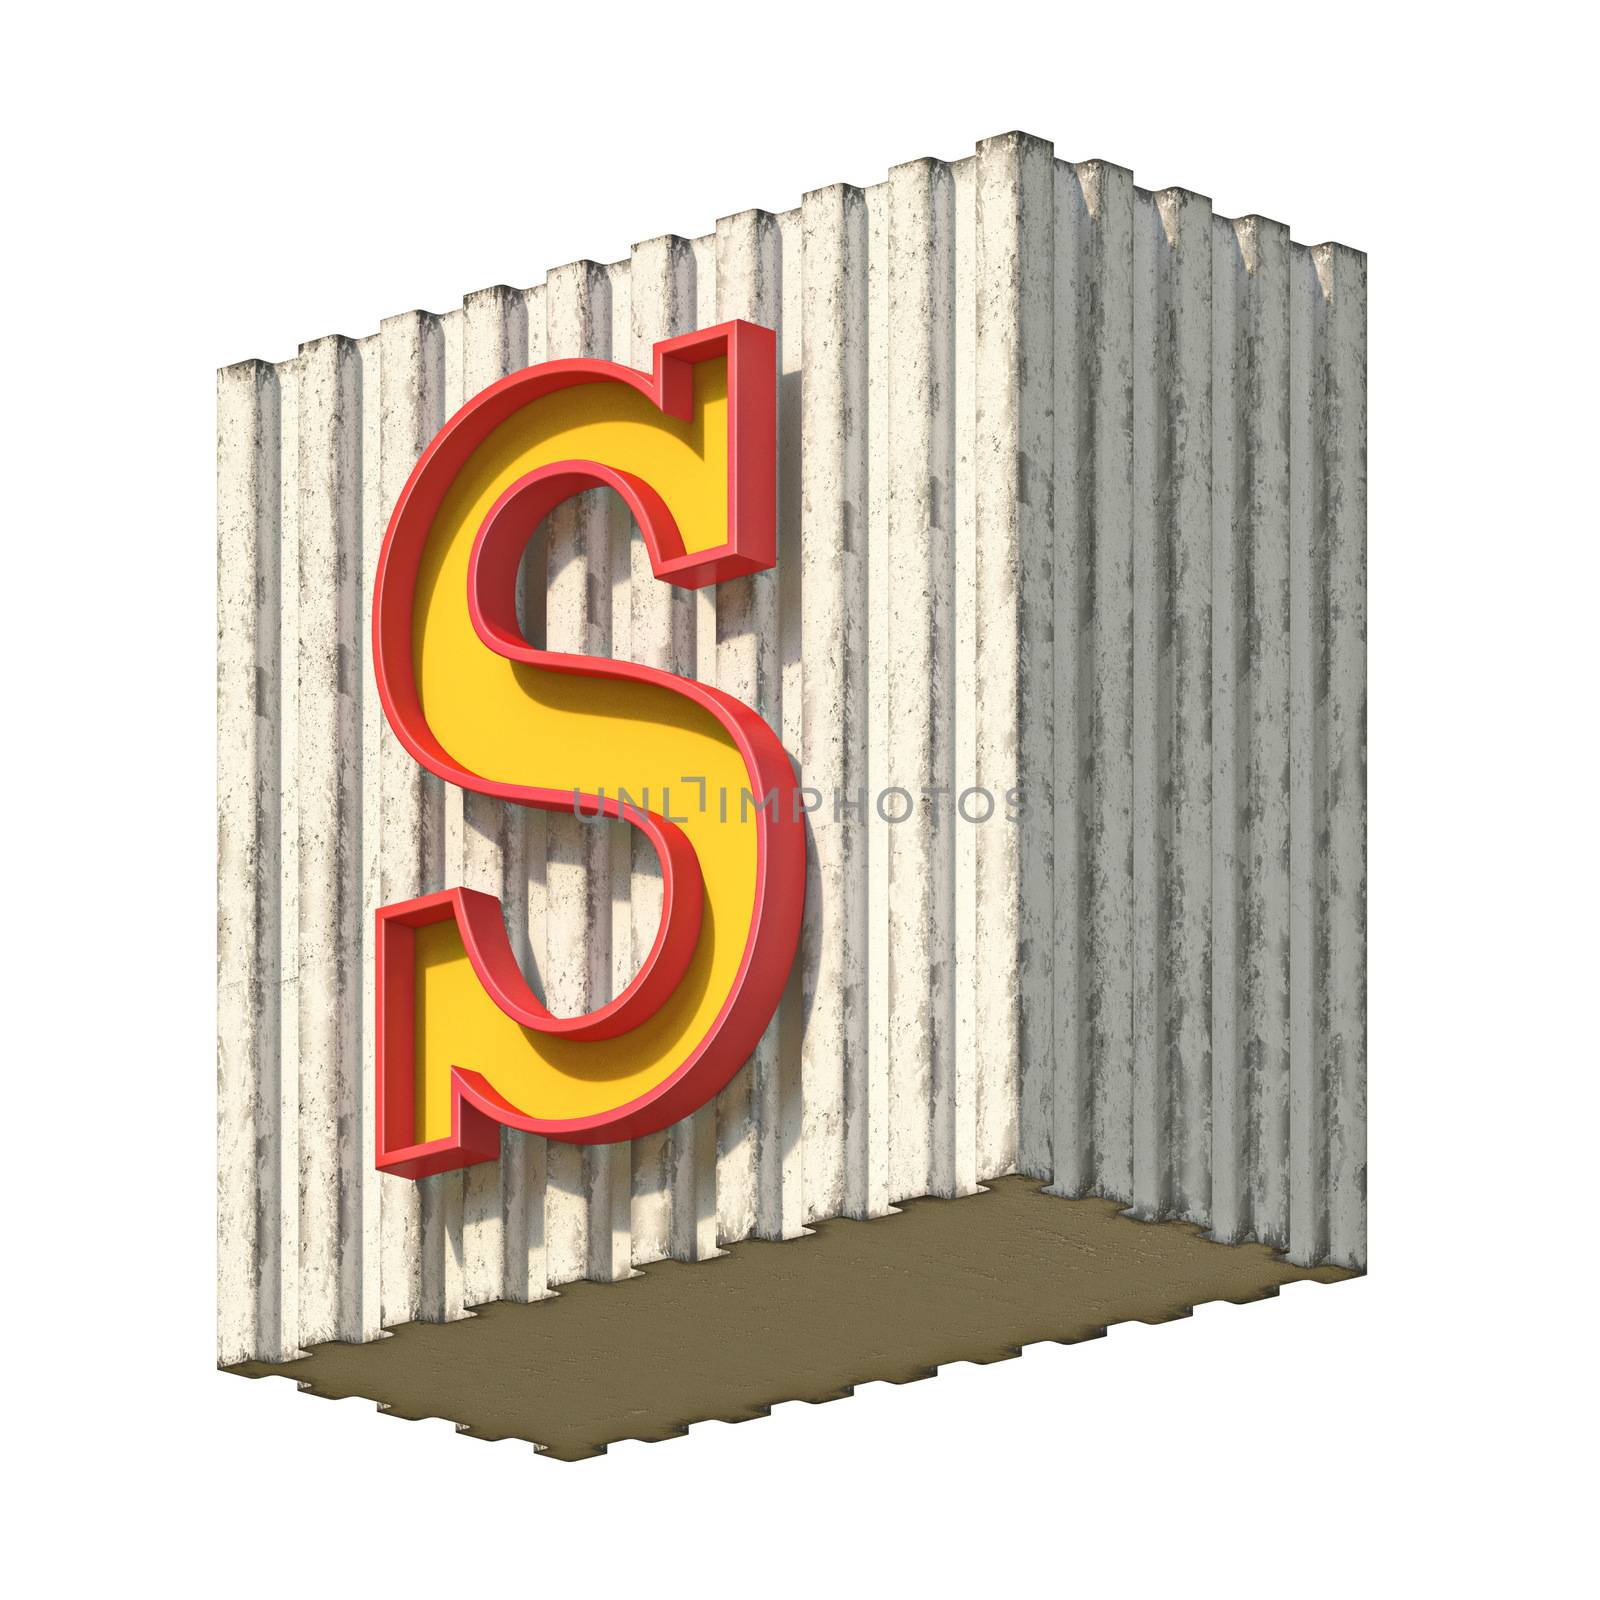 Vintage concrete red yellow font Letter S 3D render illustration isolated on white background